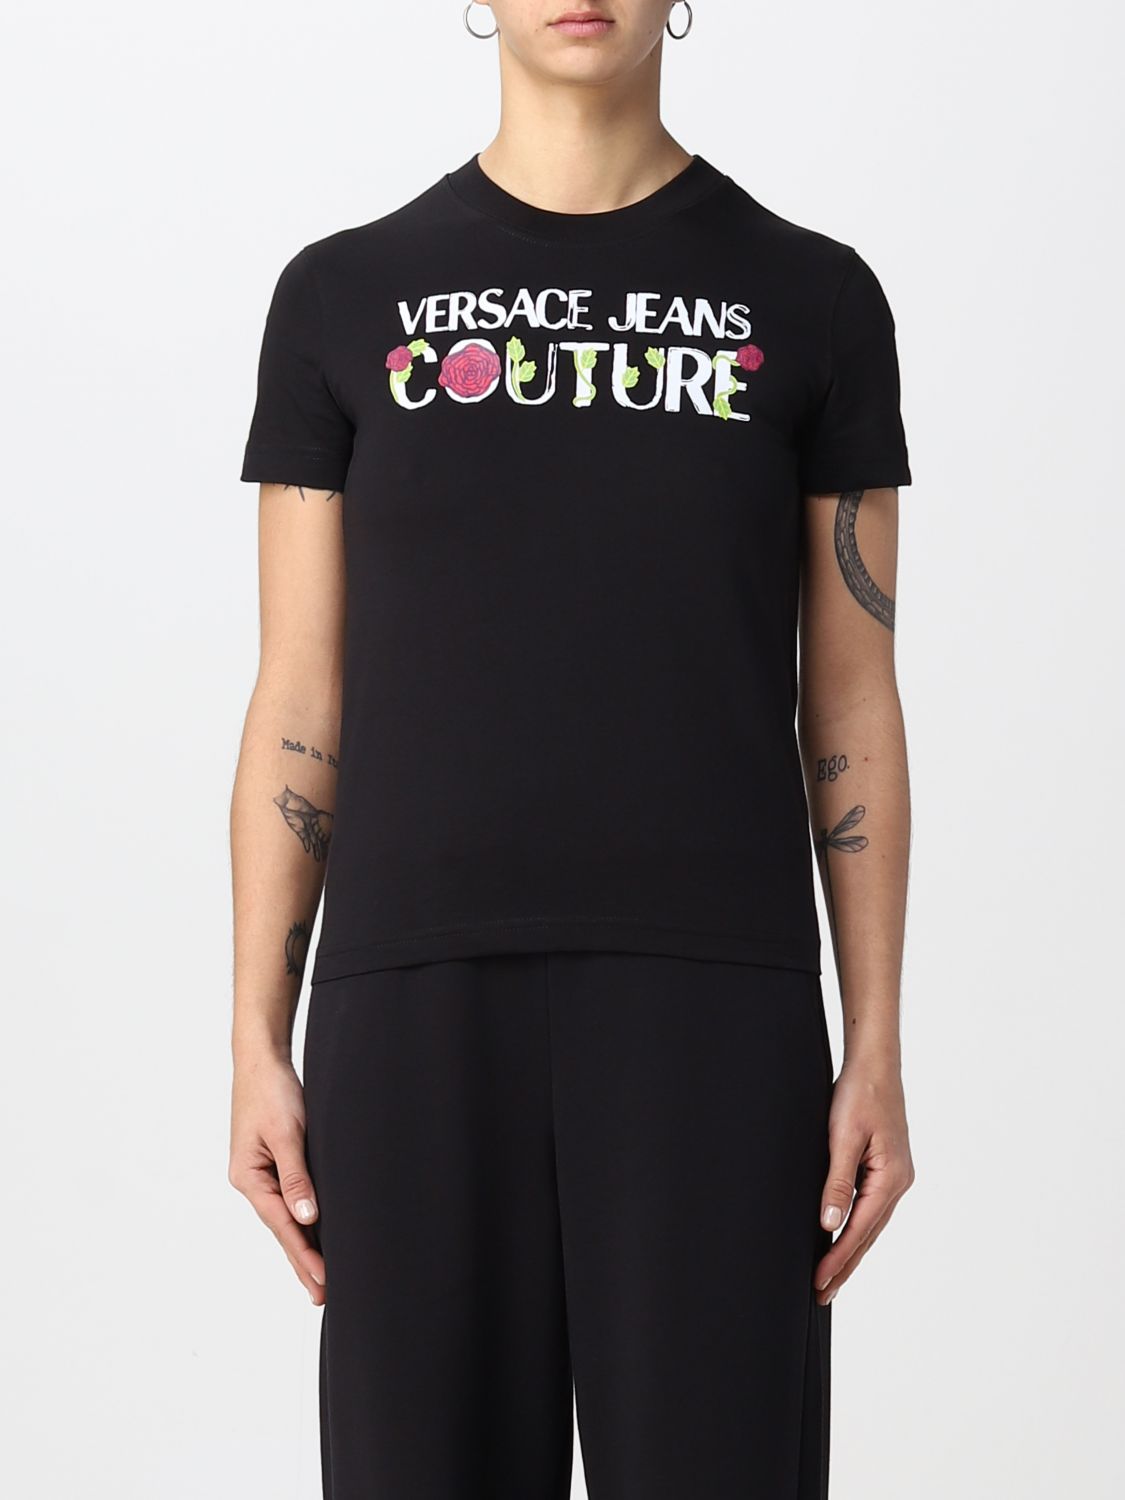 VERSACE JEANS COUTURE T恤 VERSACE JEANS COUTURE 女士 颜色 黑色,D87669002